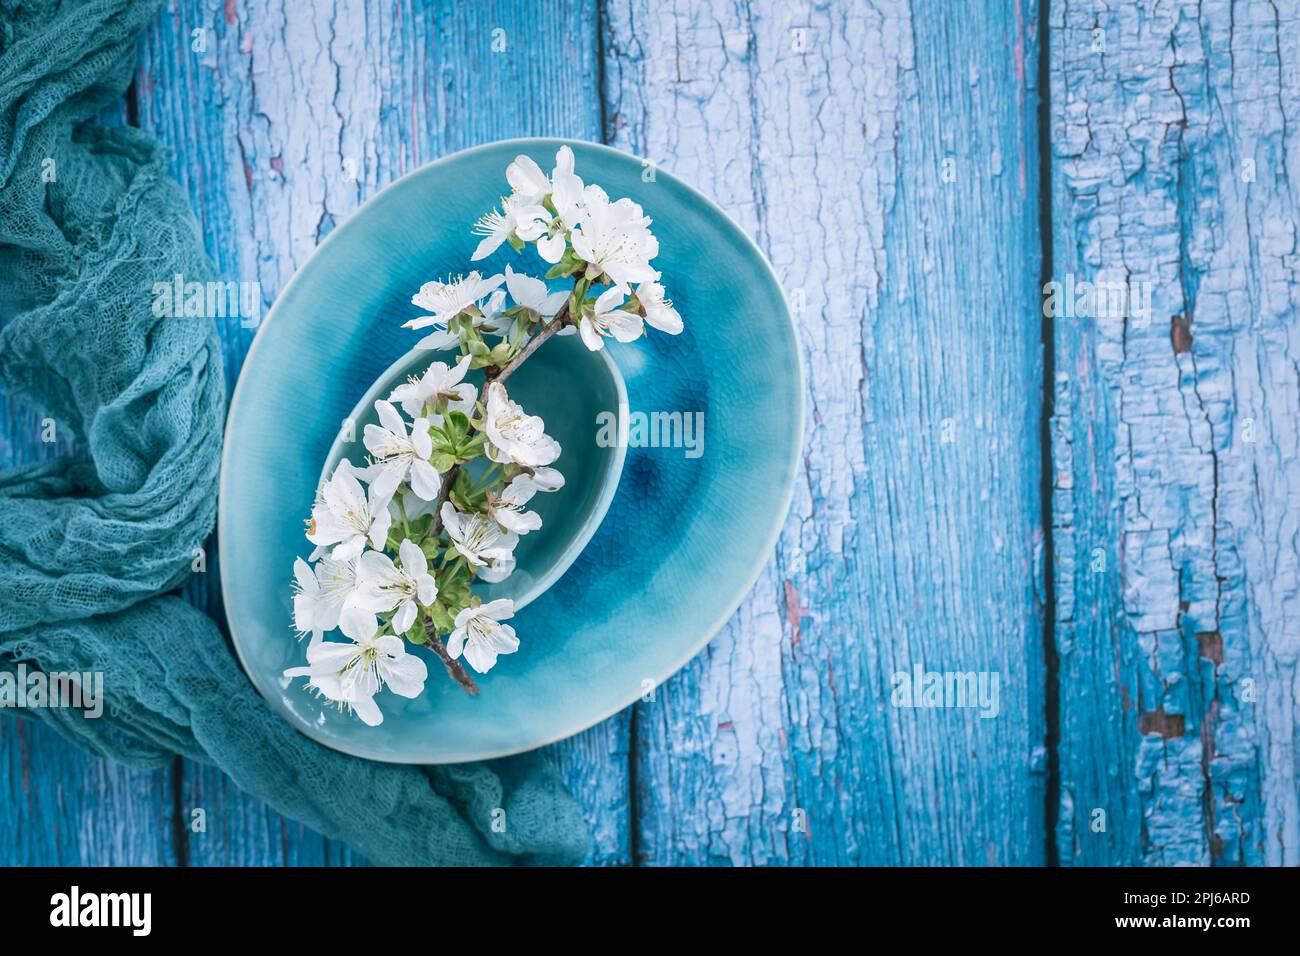 Pottery bowls or ceramics in green and blue tone with blooming cherry branch. Kitchenware Stock Photo